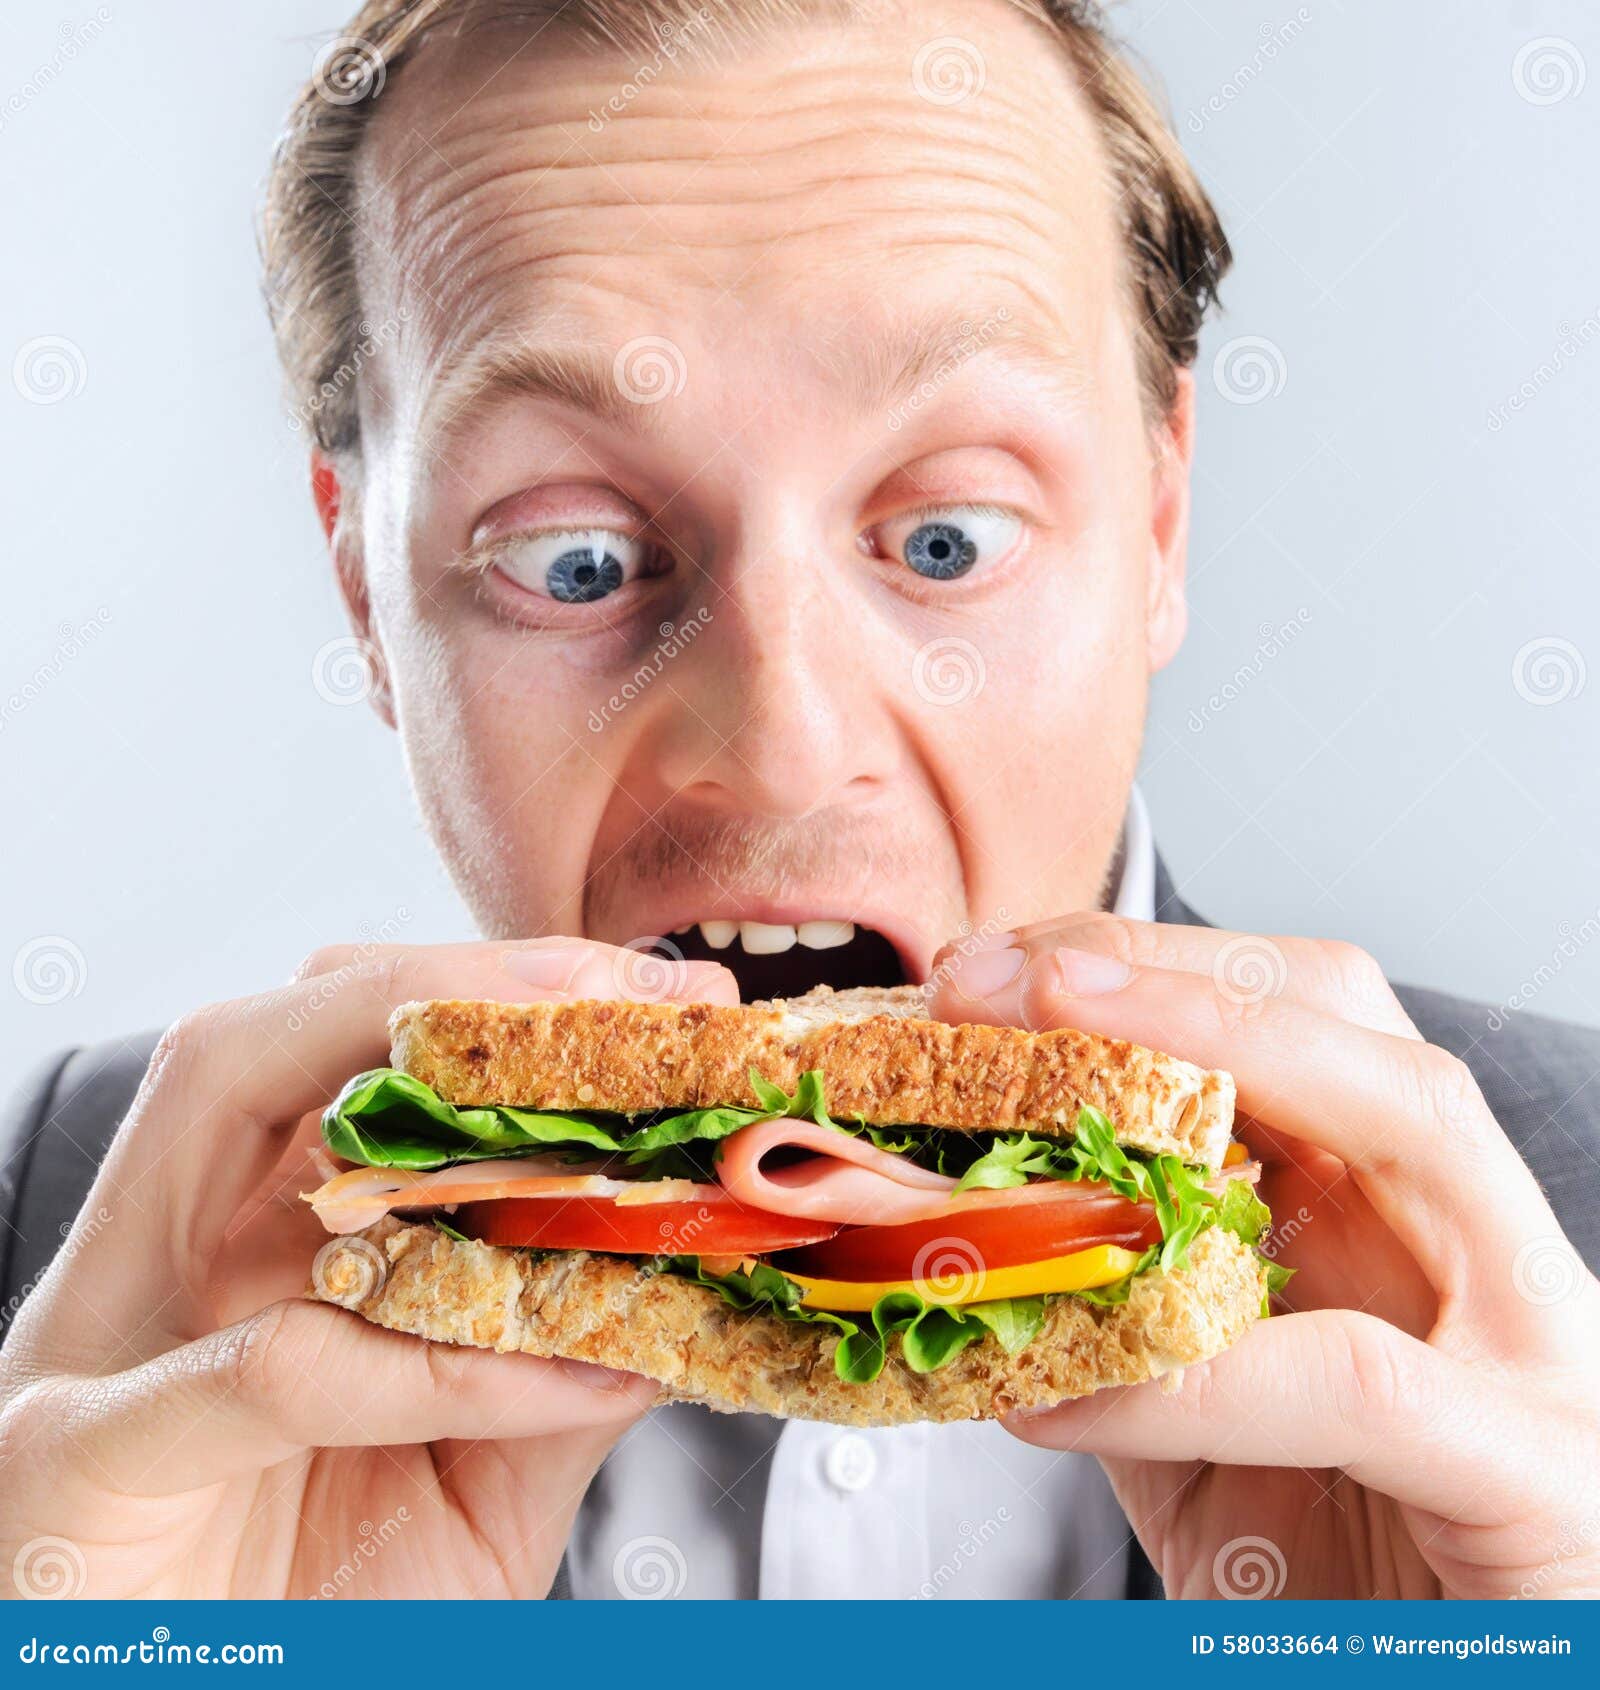 comical man eating sandwich with funny expression